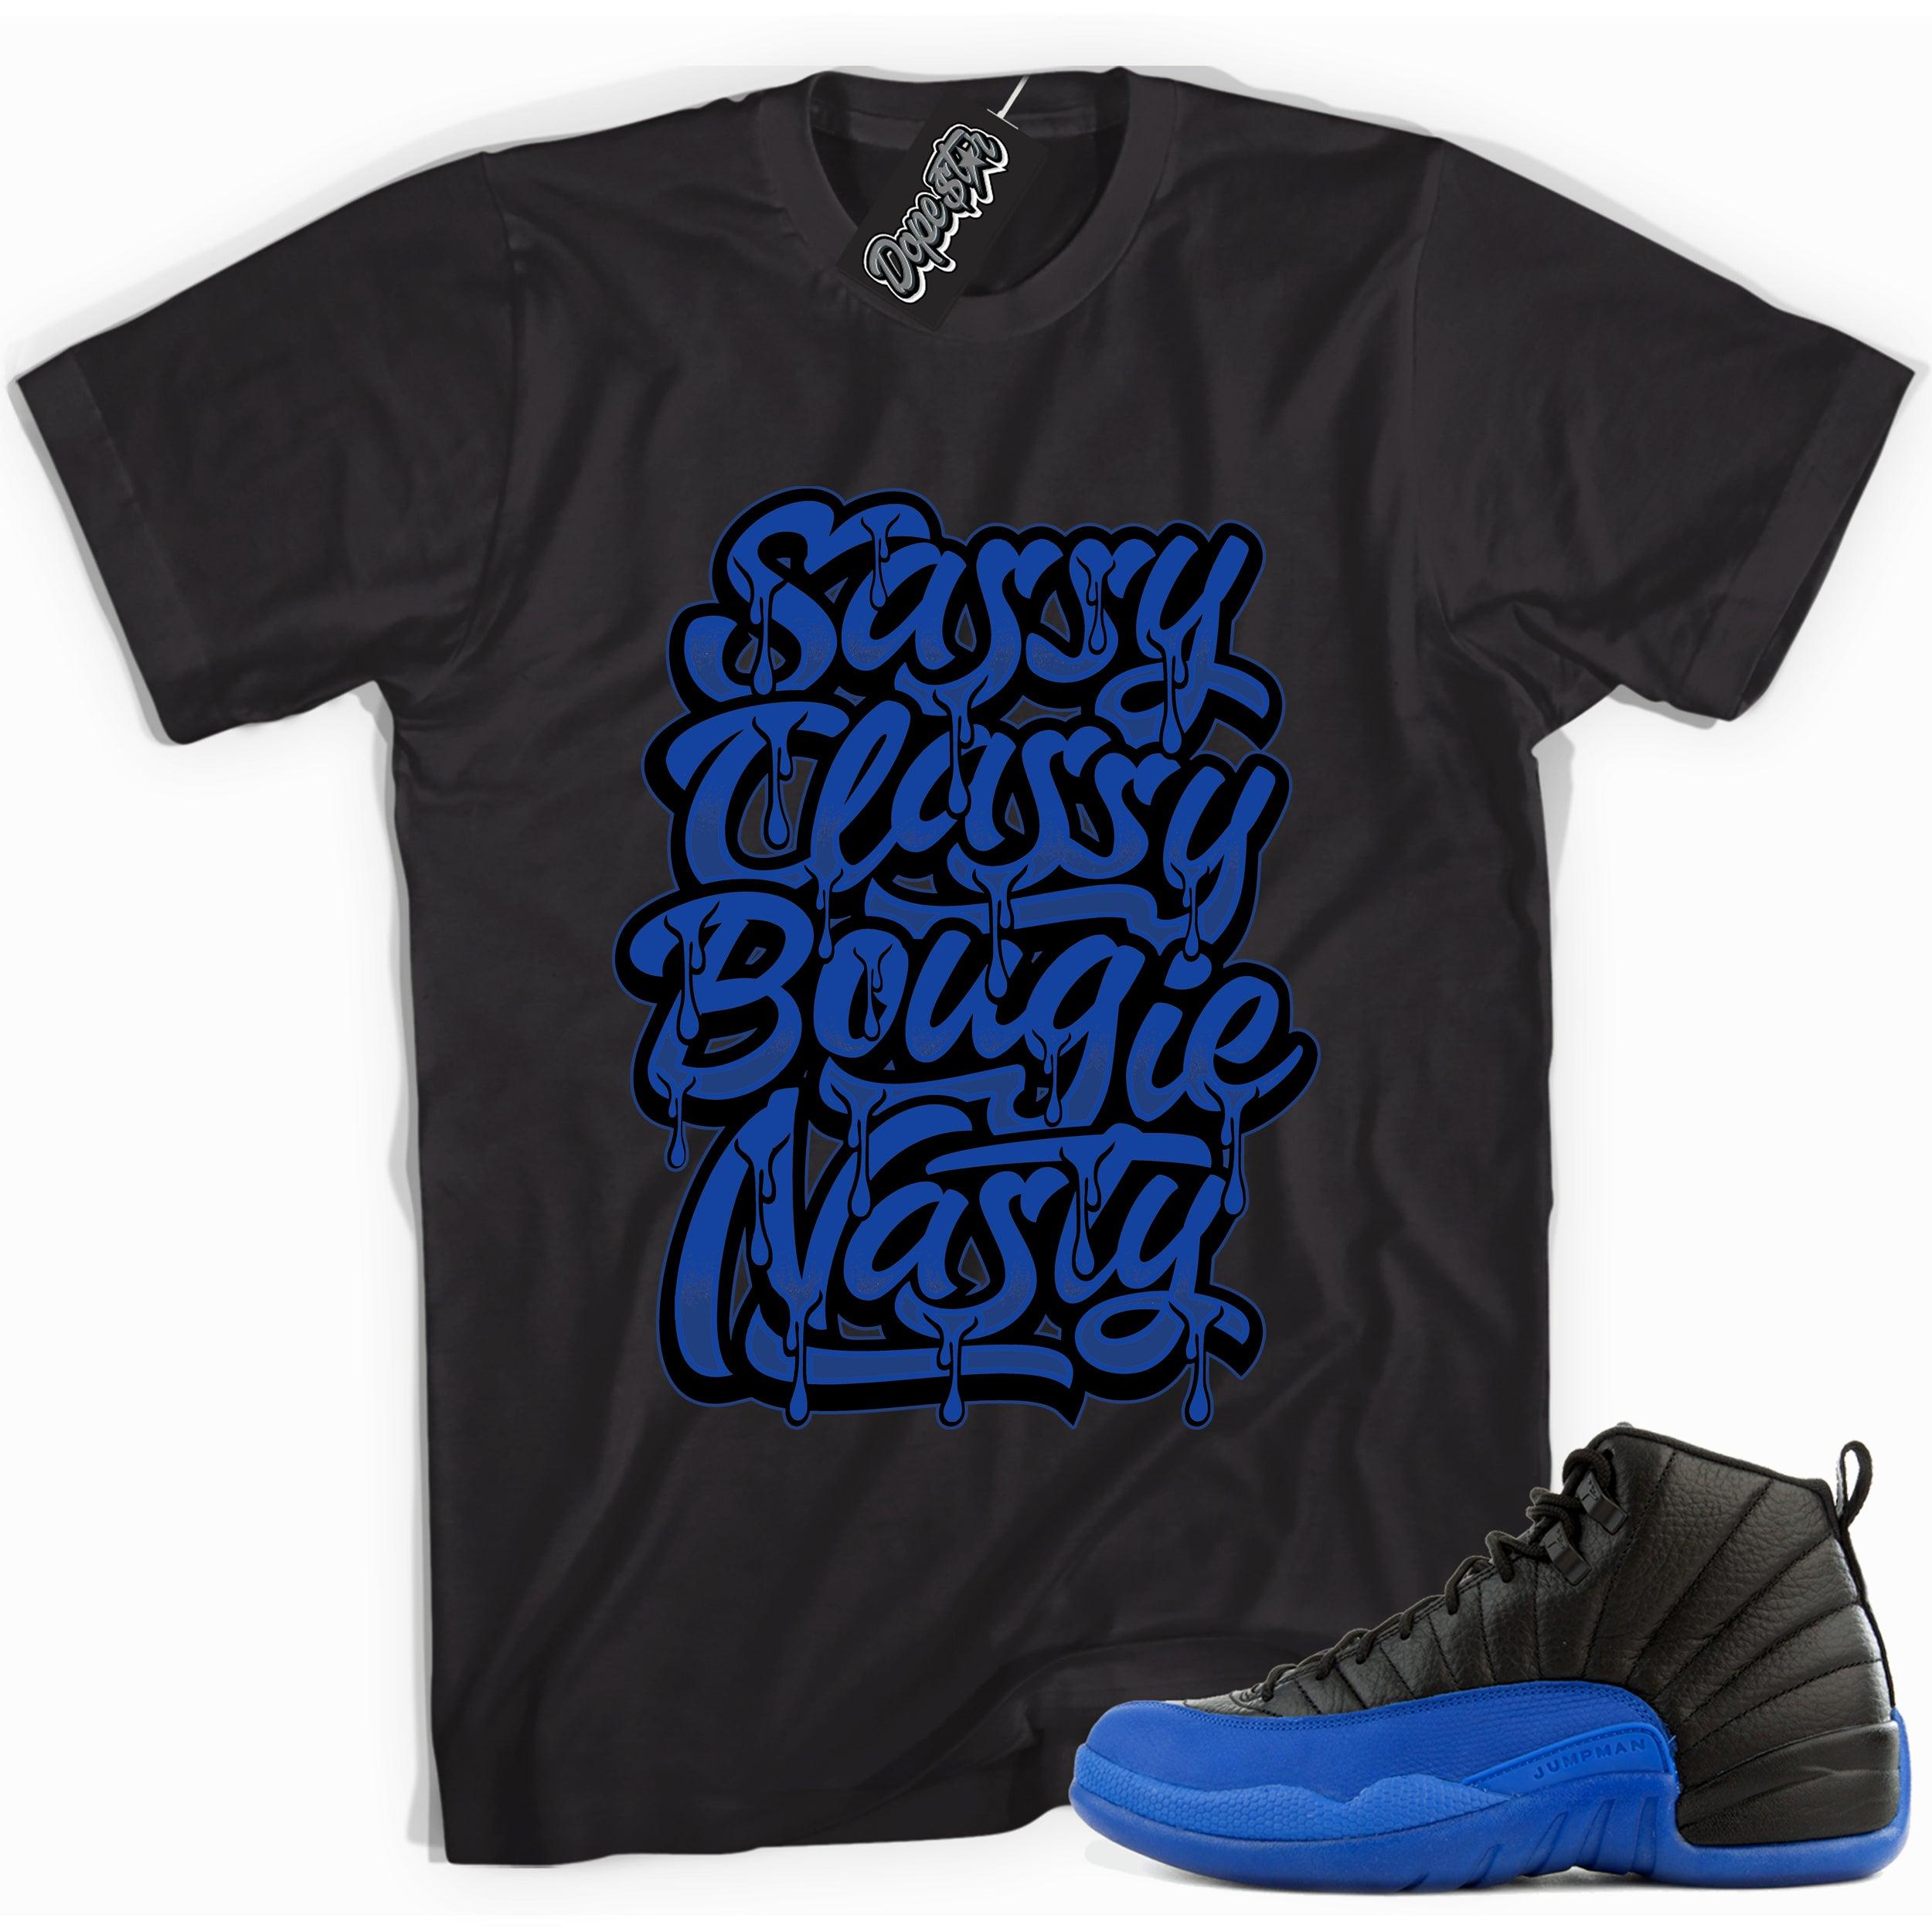 Cool black graphic tee with 'sassy classy' print, that perfectly matches  Air Jordan 12 Retro Black Game Royal sneakers.